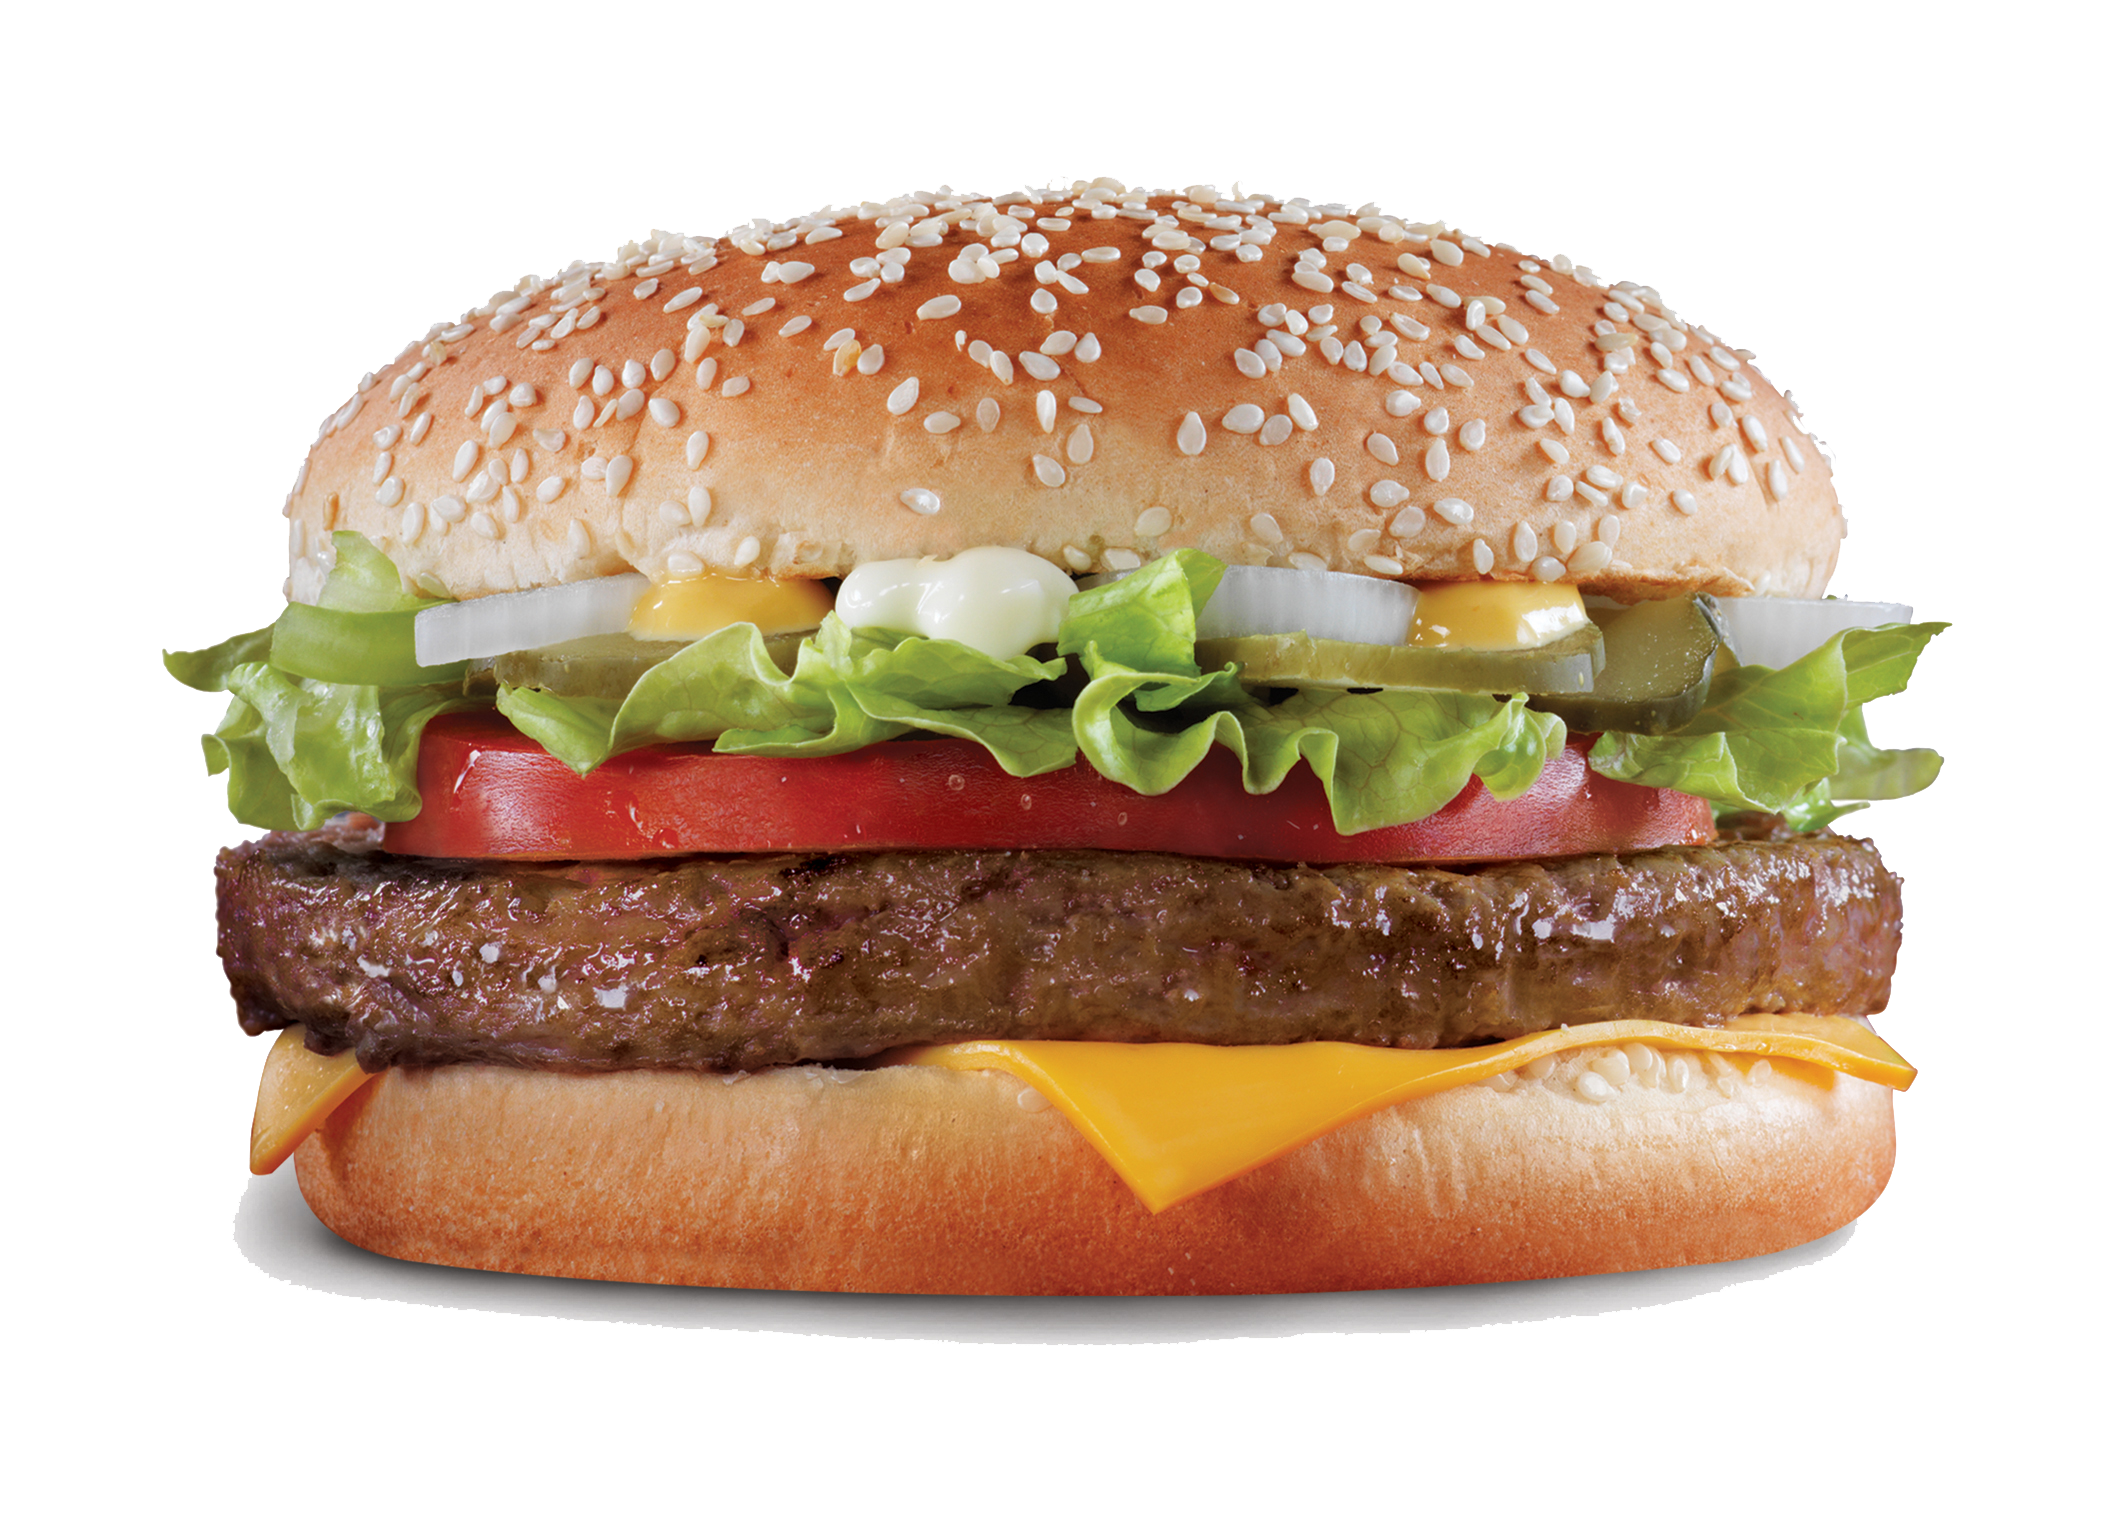 Burger Png Picture PNG Image